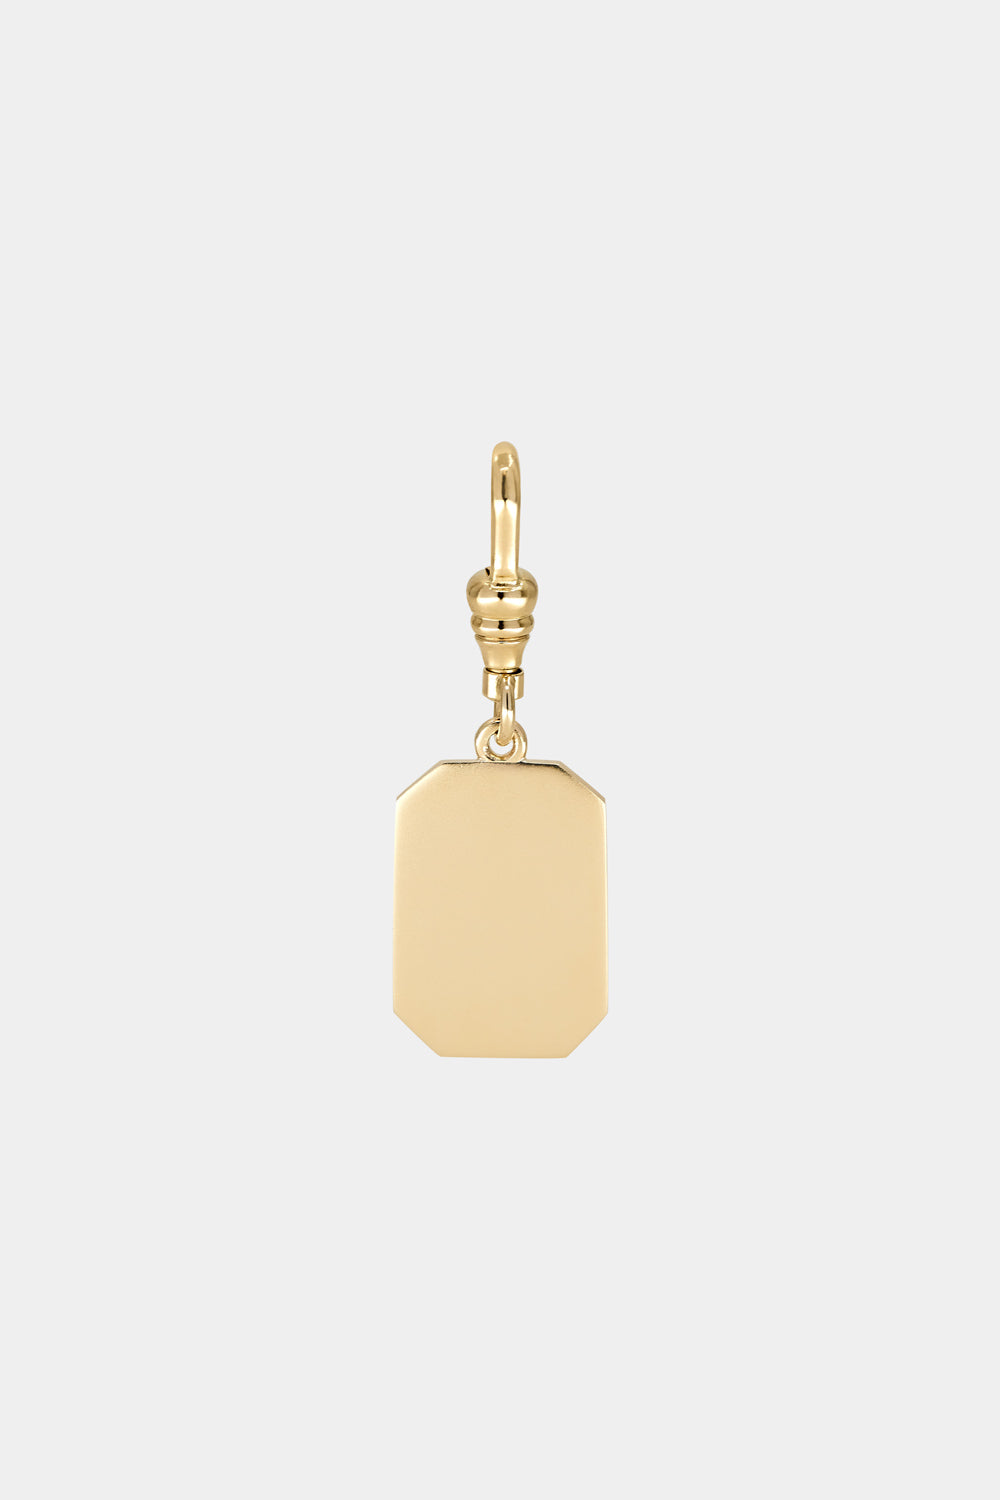 Tag Attachment | 9K Yellow Gold